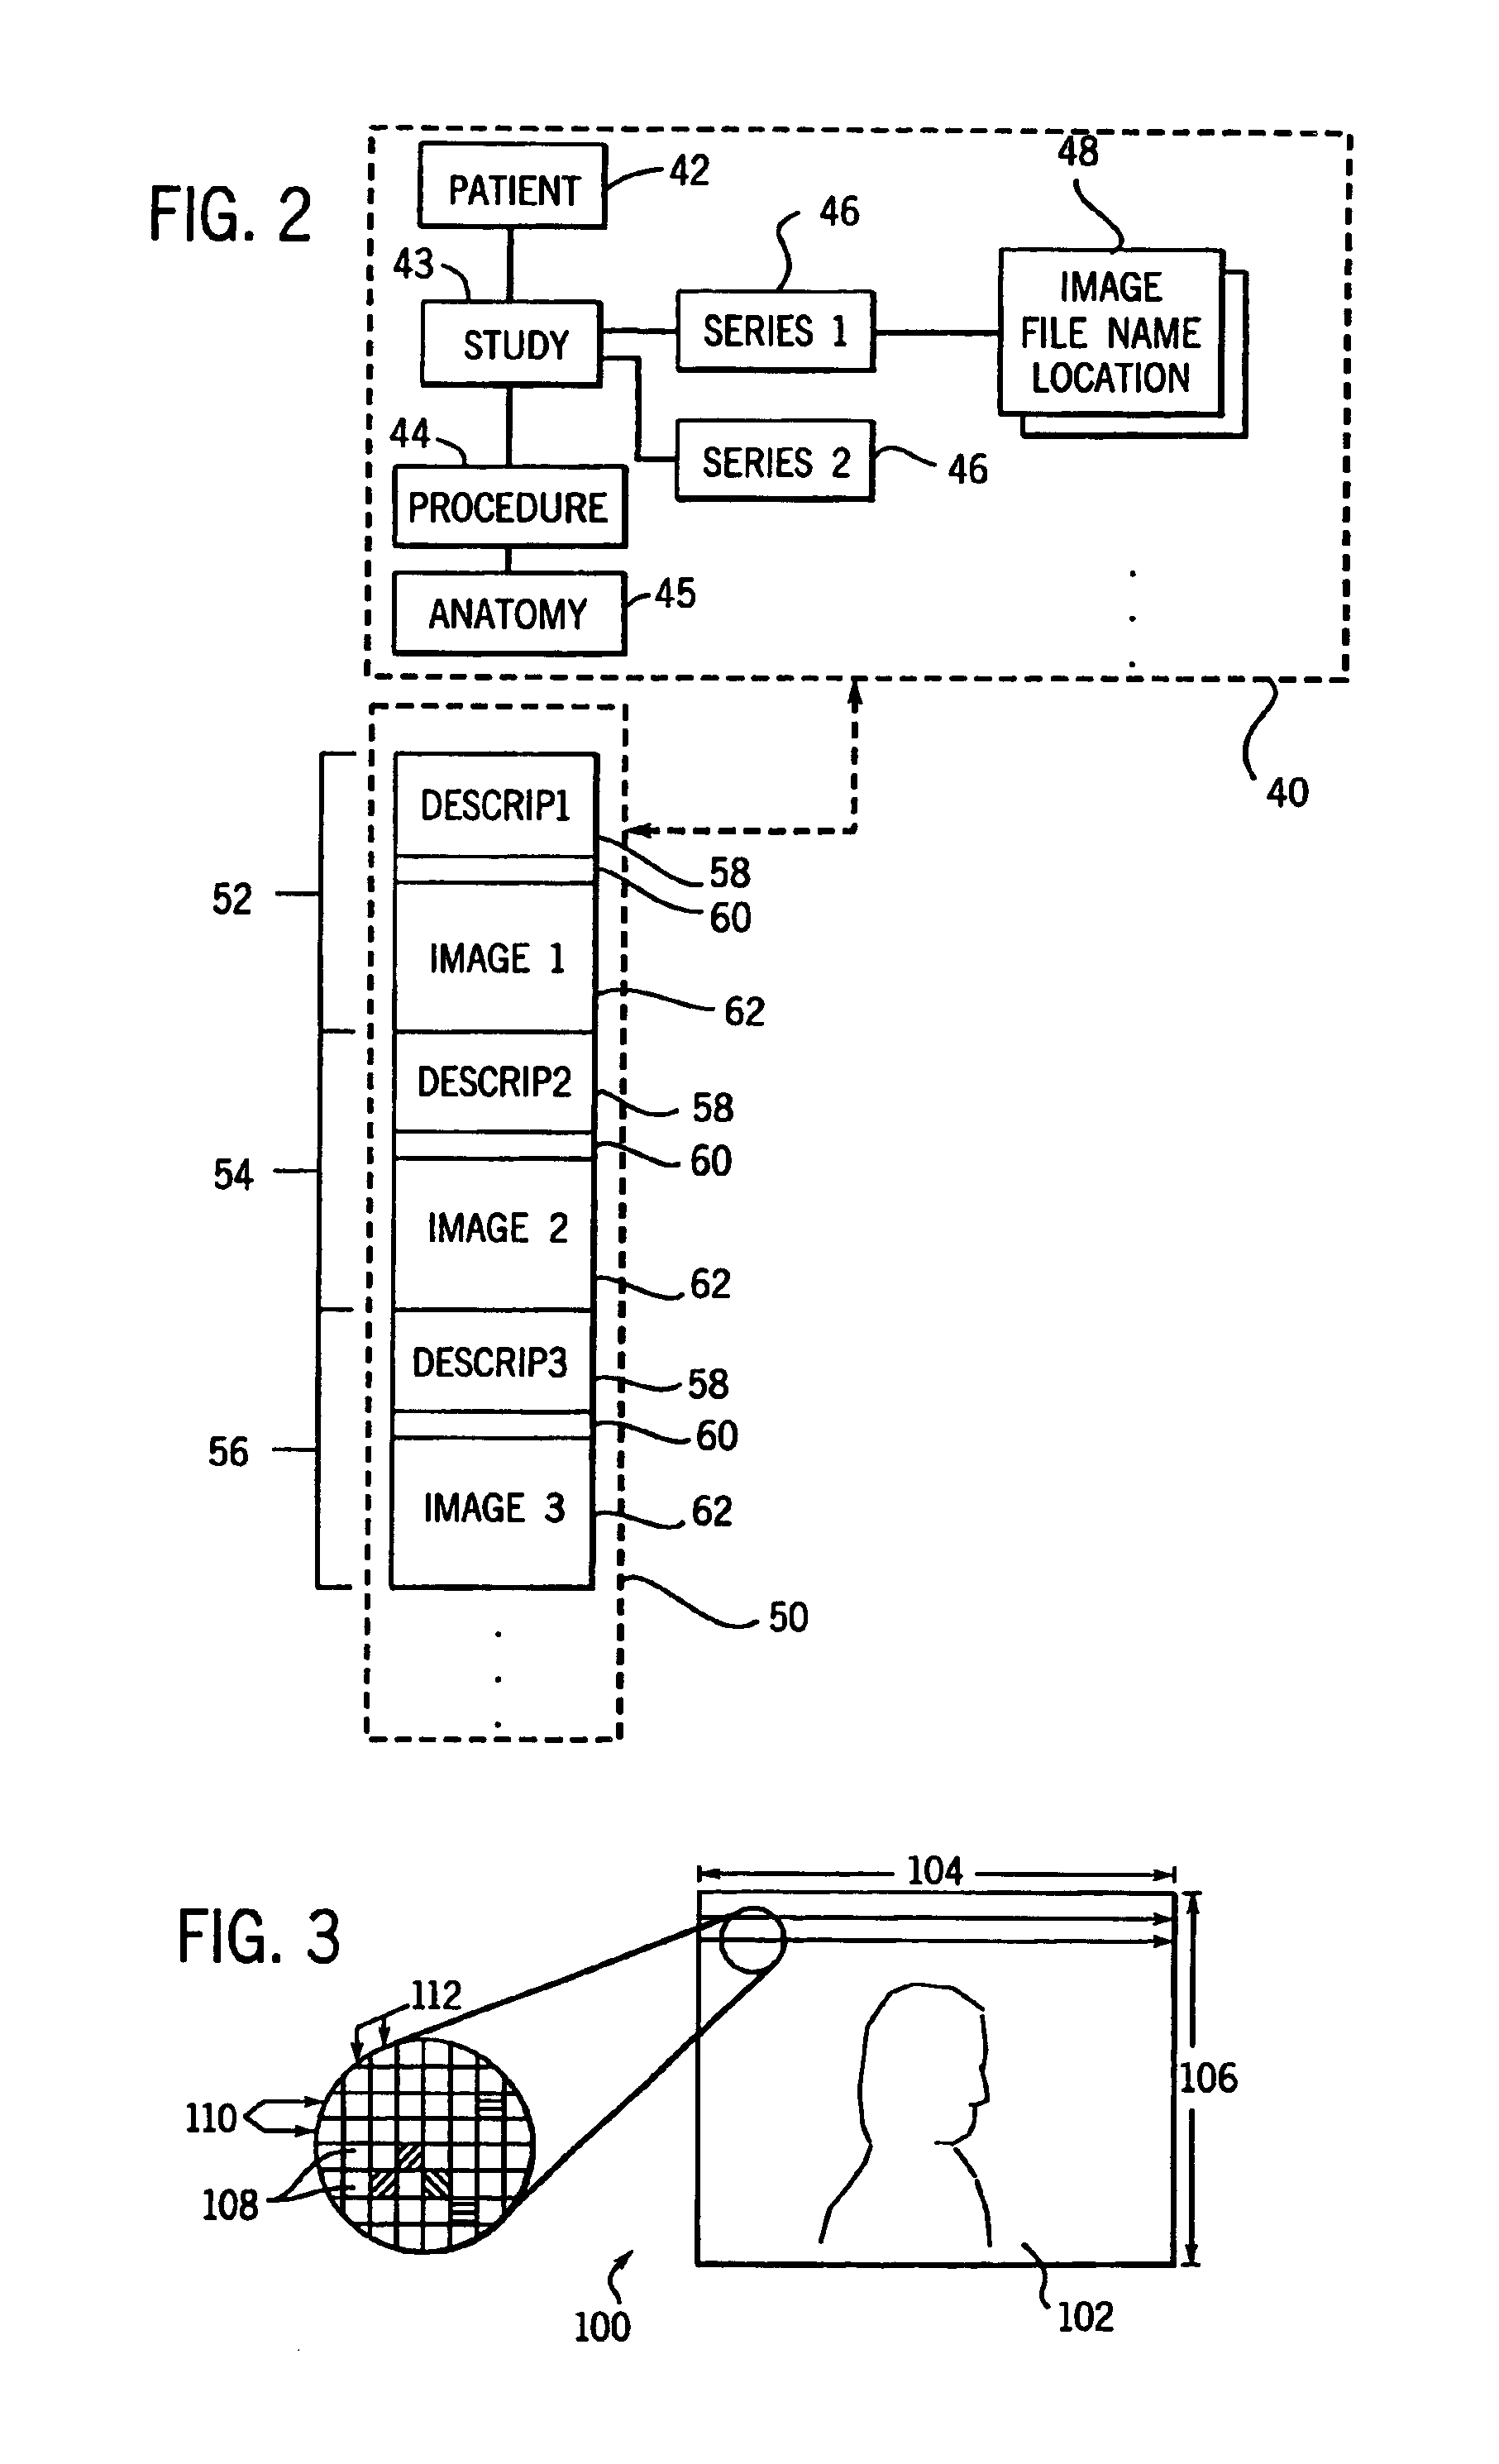 Method and system for lossless wavelet decomposition, compression and decompression of data